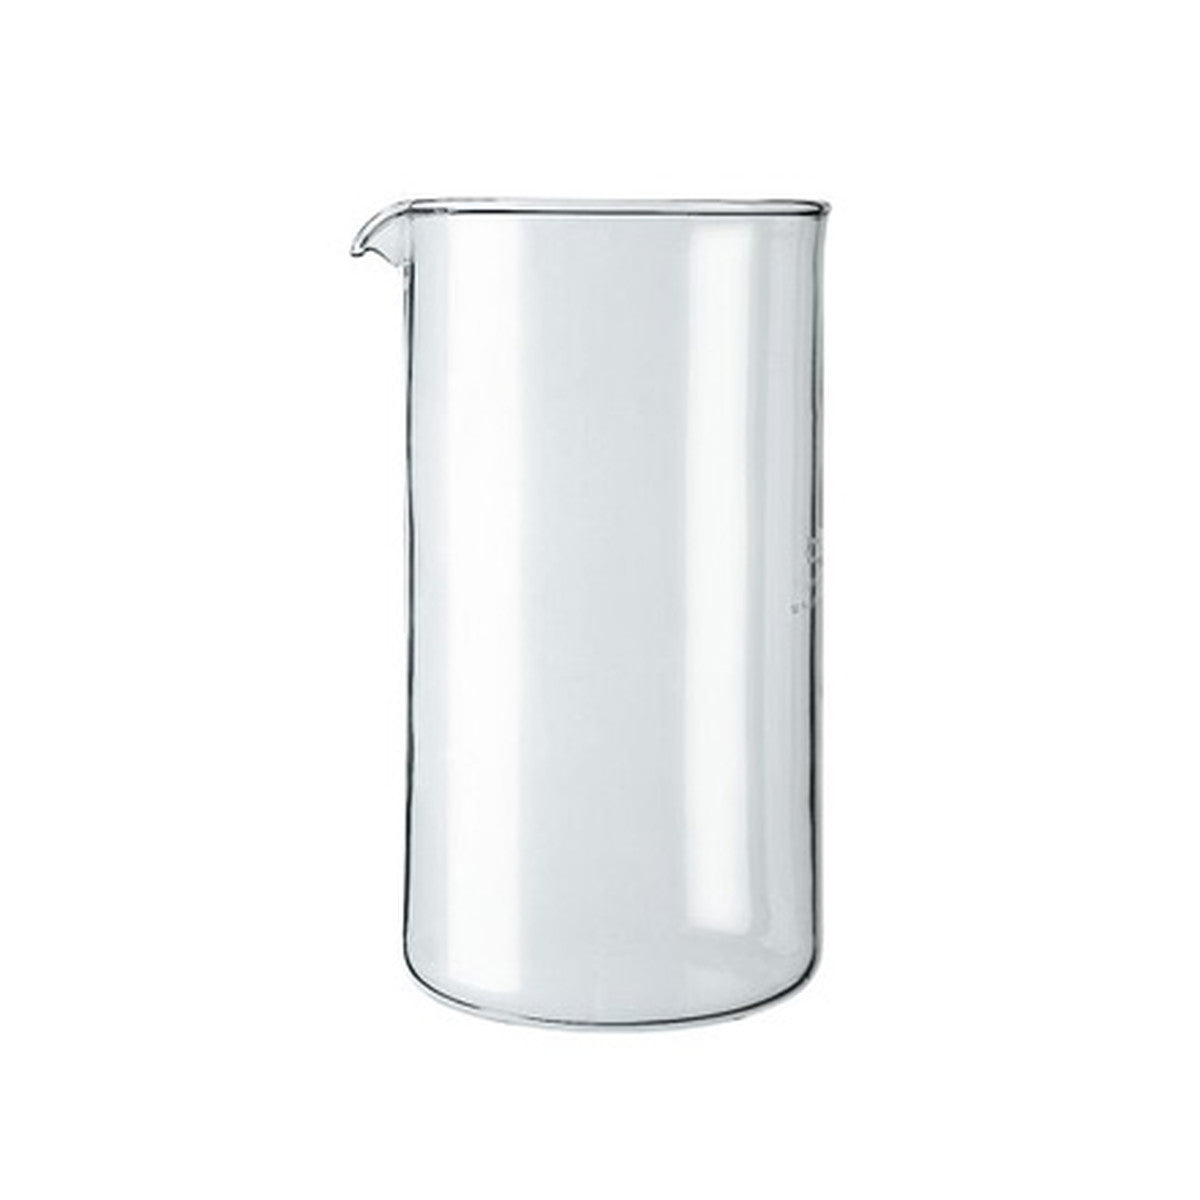 Alessi Replacement Glass for Coffee Press 33oz